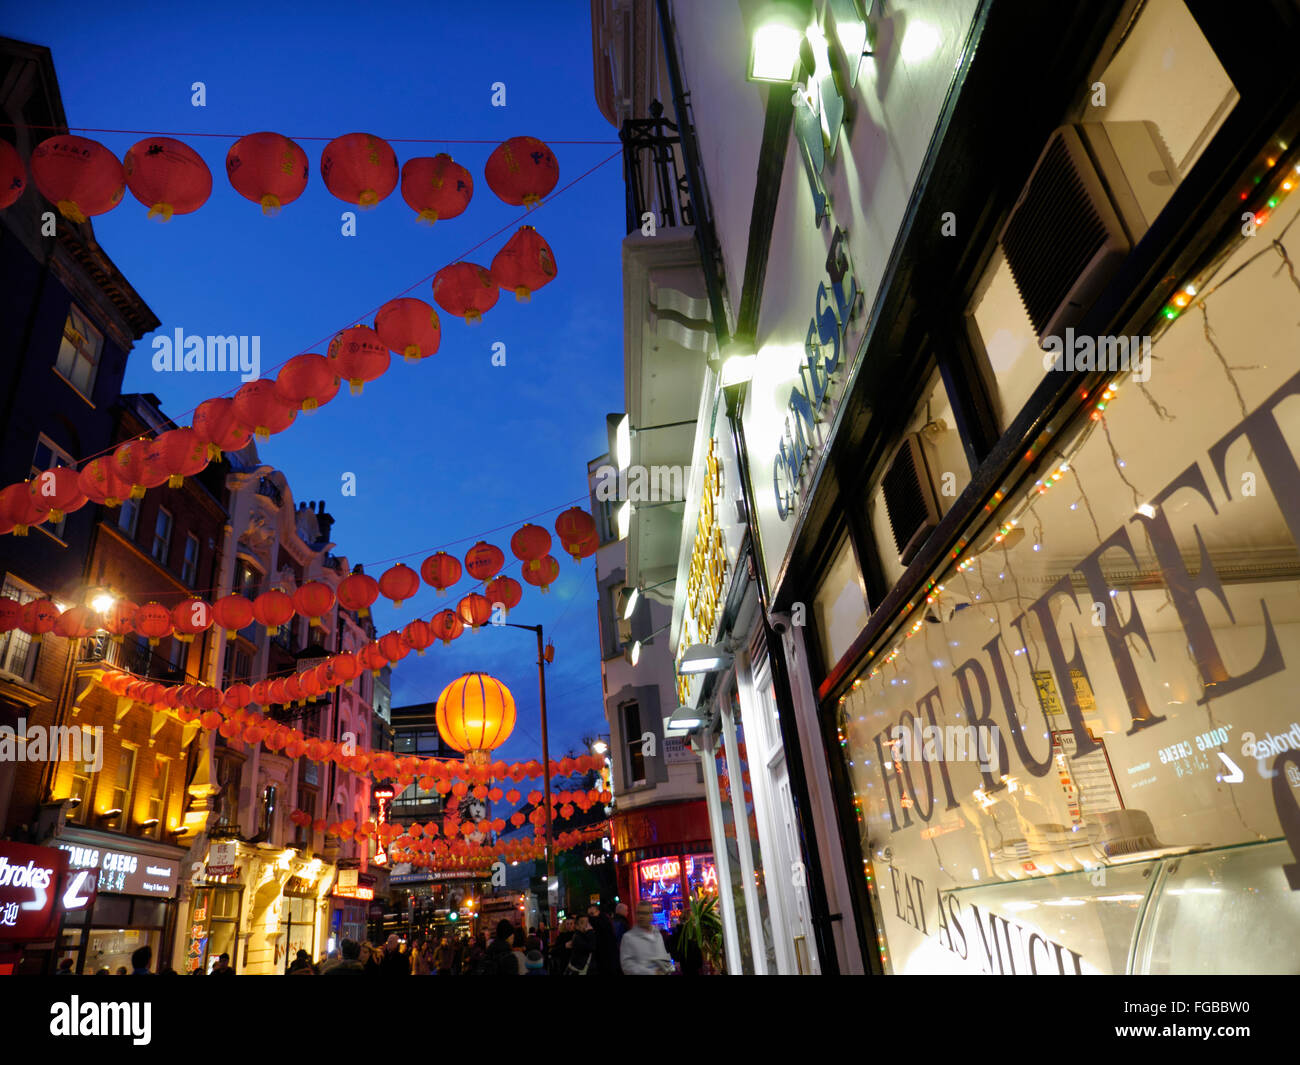 CHINESE BUFFET SIGN red traditional Chinese lanterns and typical Chinese buffet window in foreground Chinatown Soho London UK Stock Photo